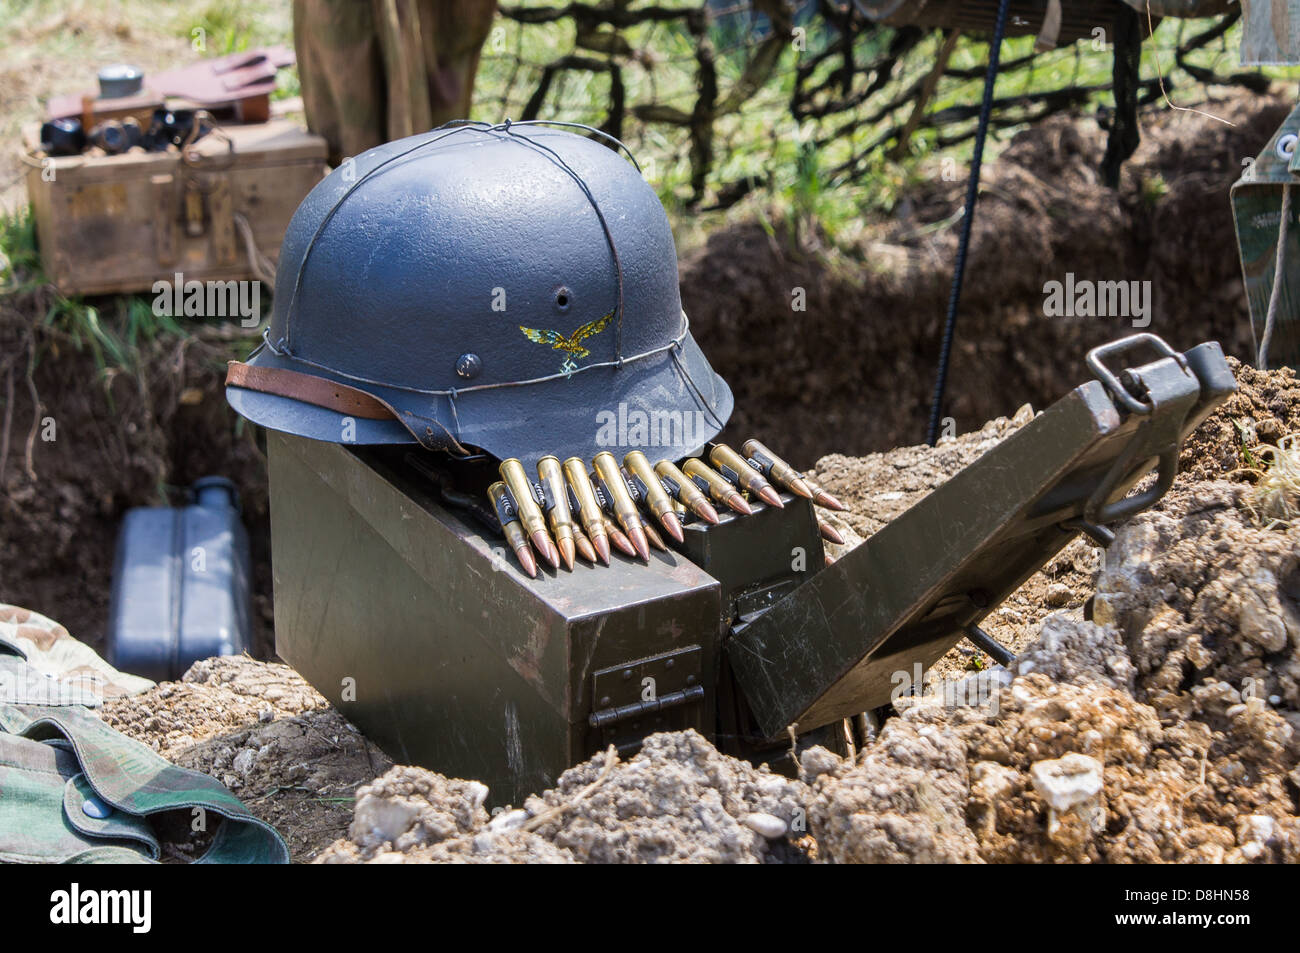 Overlord, D-Day re-enactment at Denmead 2013. Still life of German helmet, machine gun ammunition box and bullets in a dug out. Stock Photo